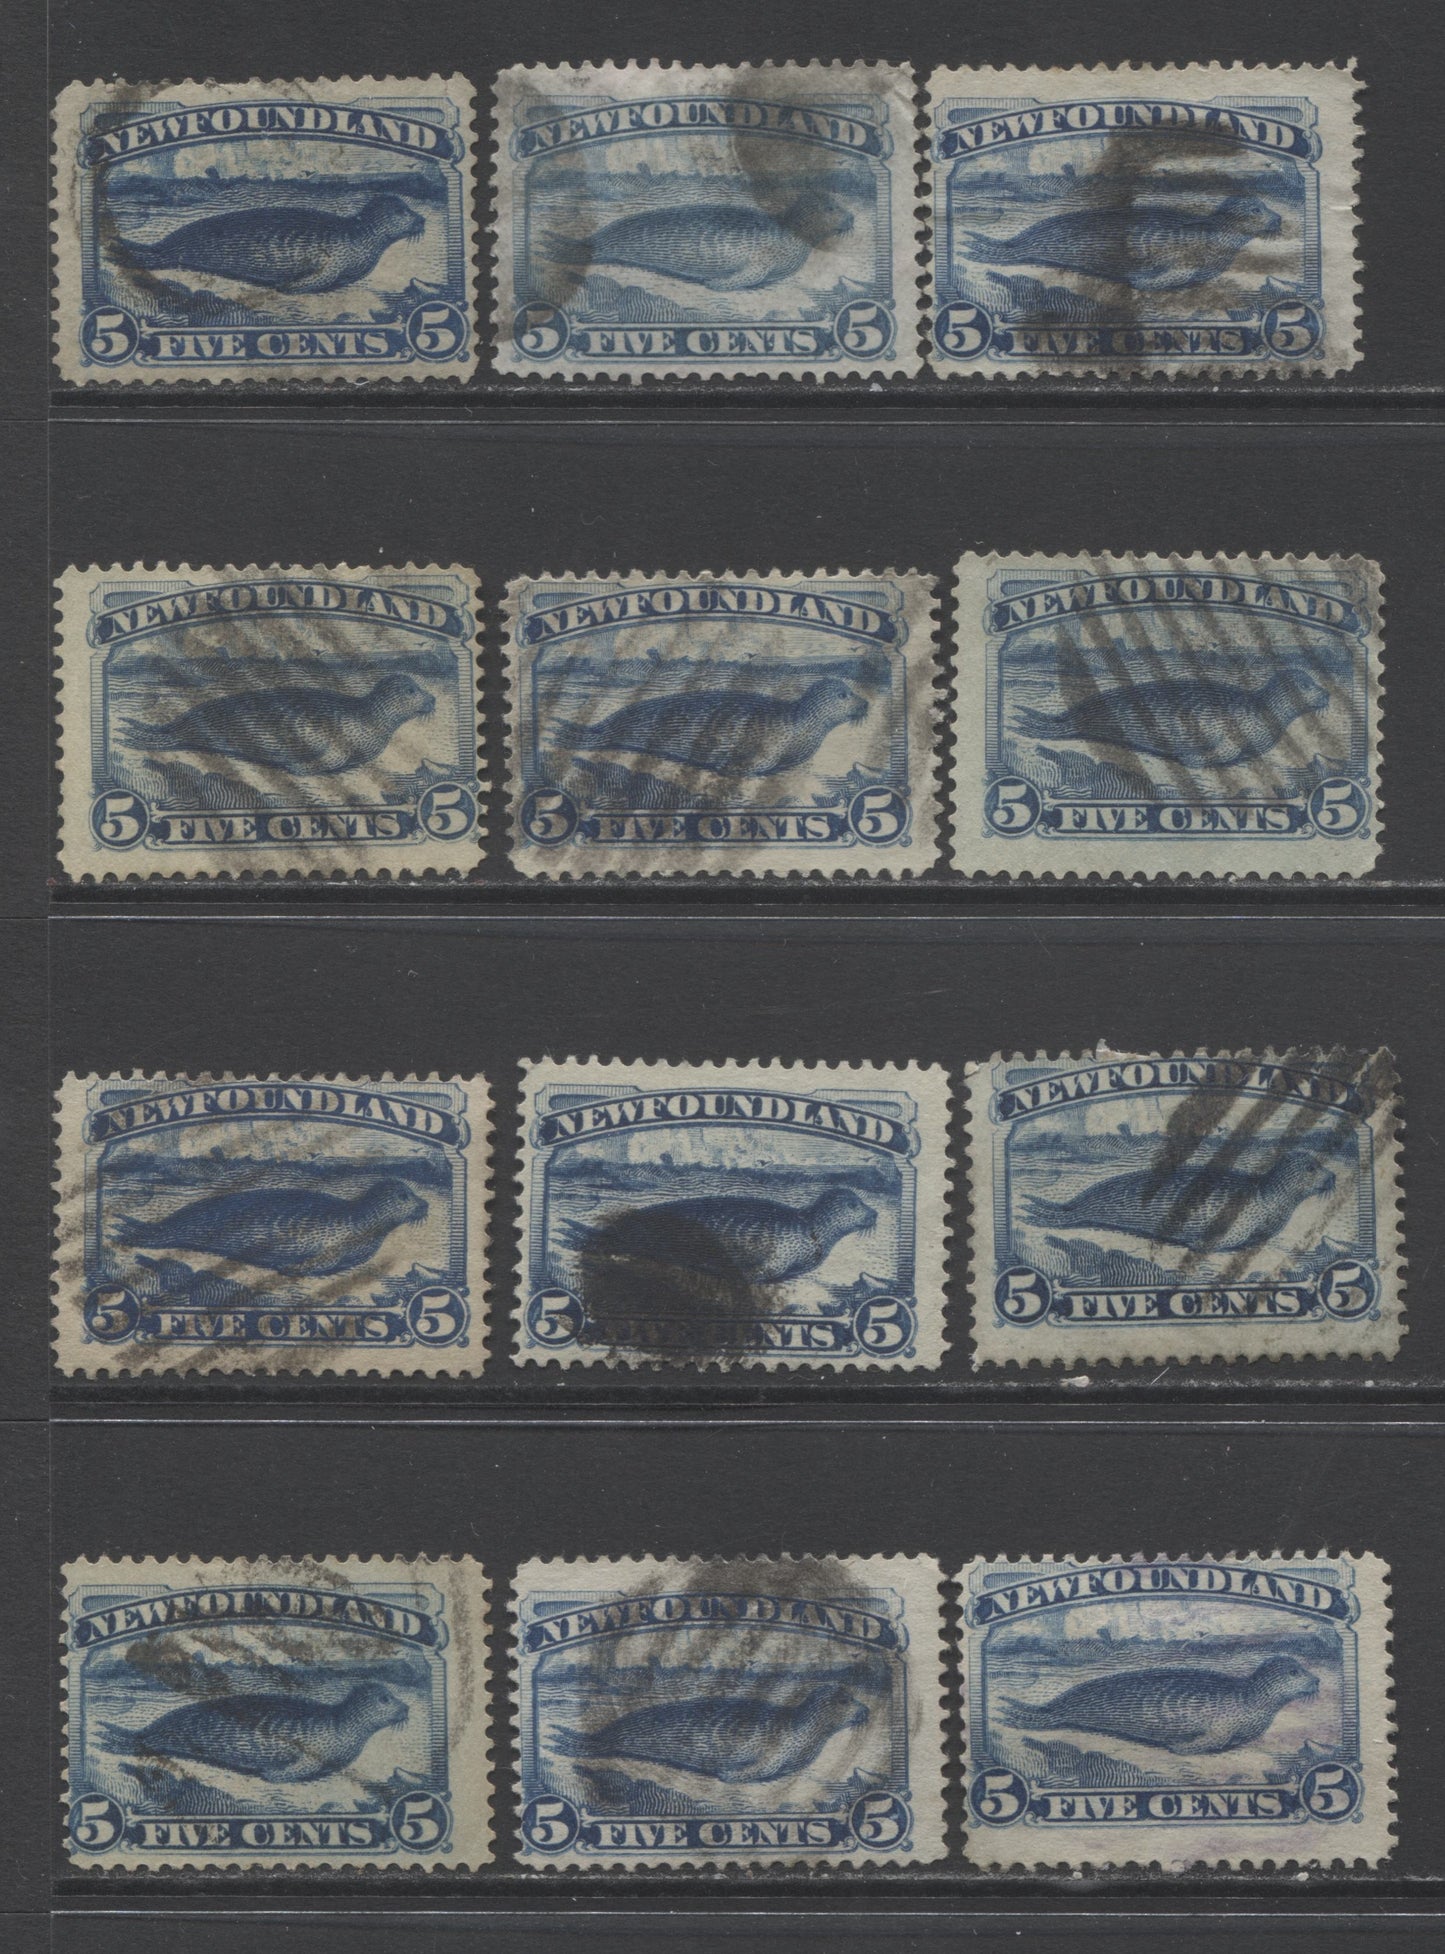 Lot 335 Newfoundland #53-54 5c Pale Blue & Dark Blue Hard Seals, 1880-1896 Third Cents Issue, 13 Very Good - Fine Used Singles, A Study Group Showing Different Papers & Shade Variations